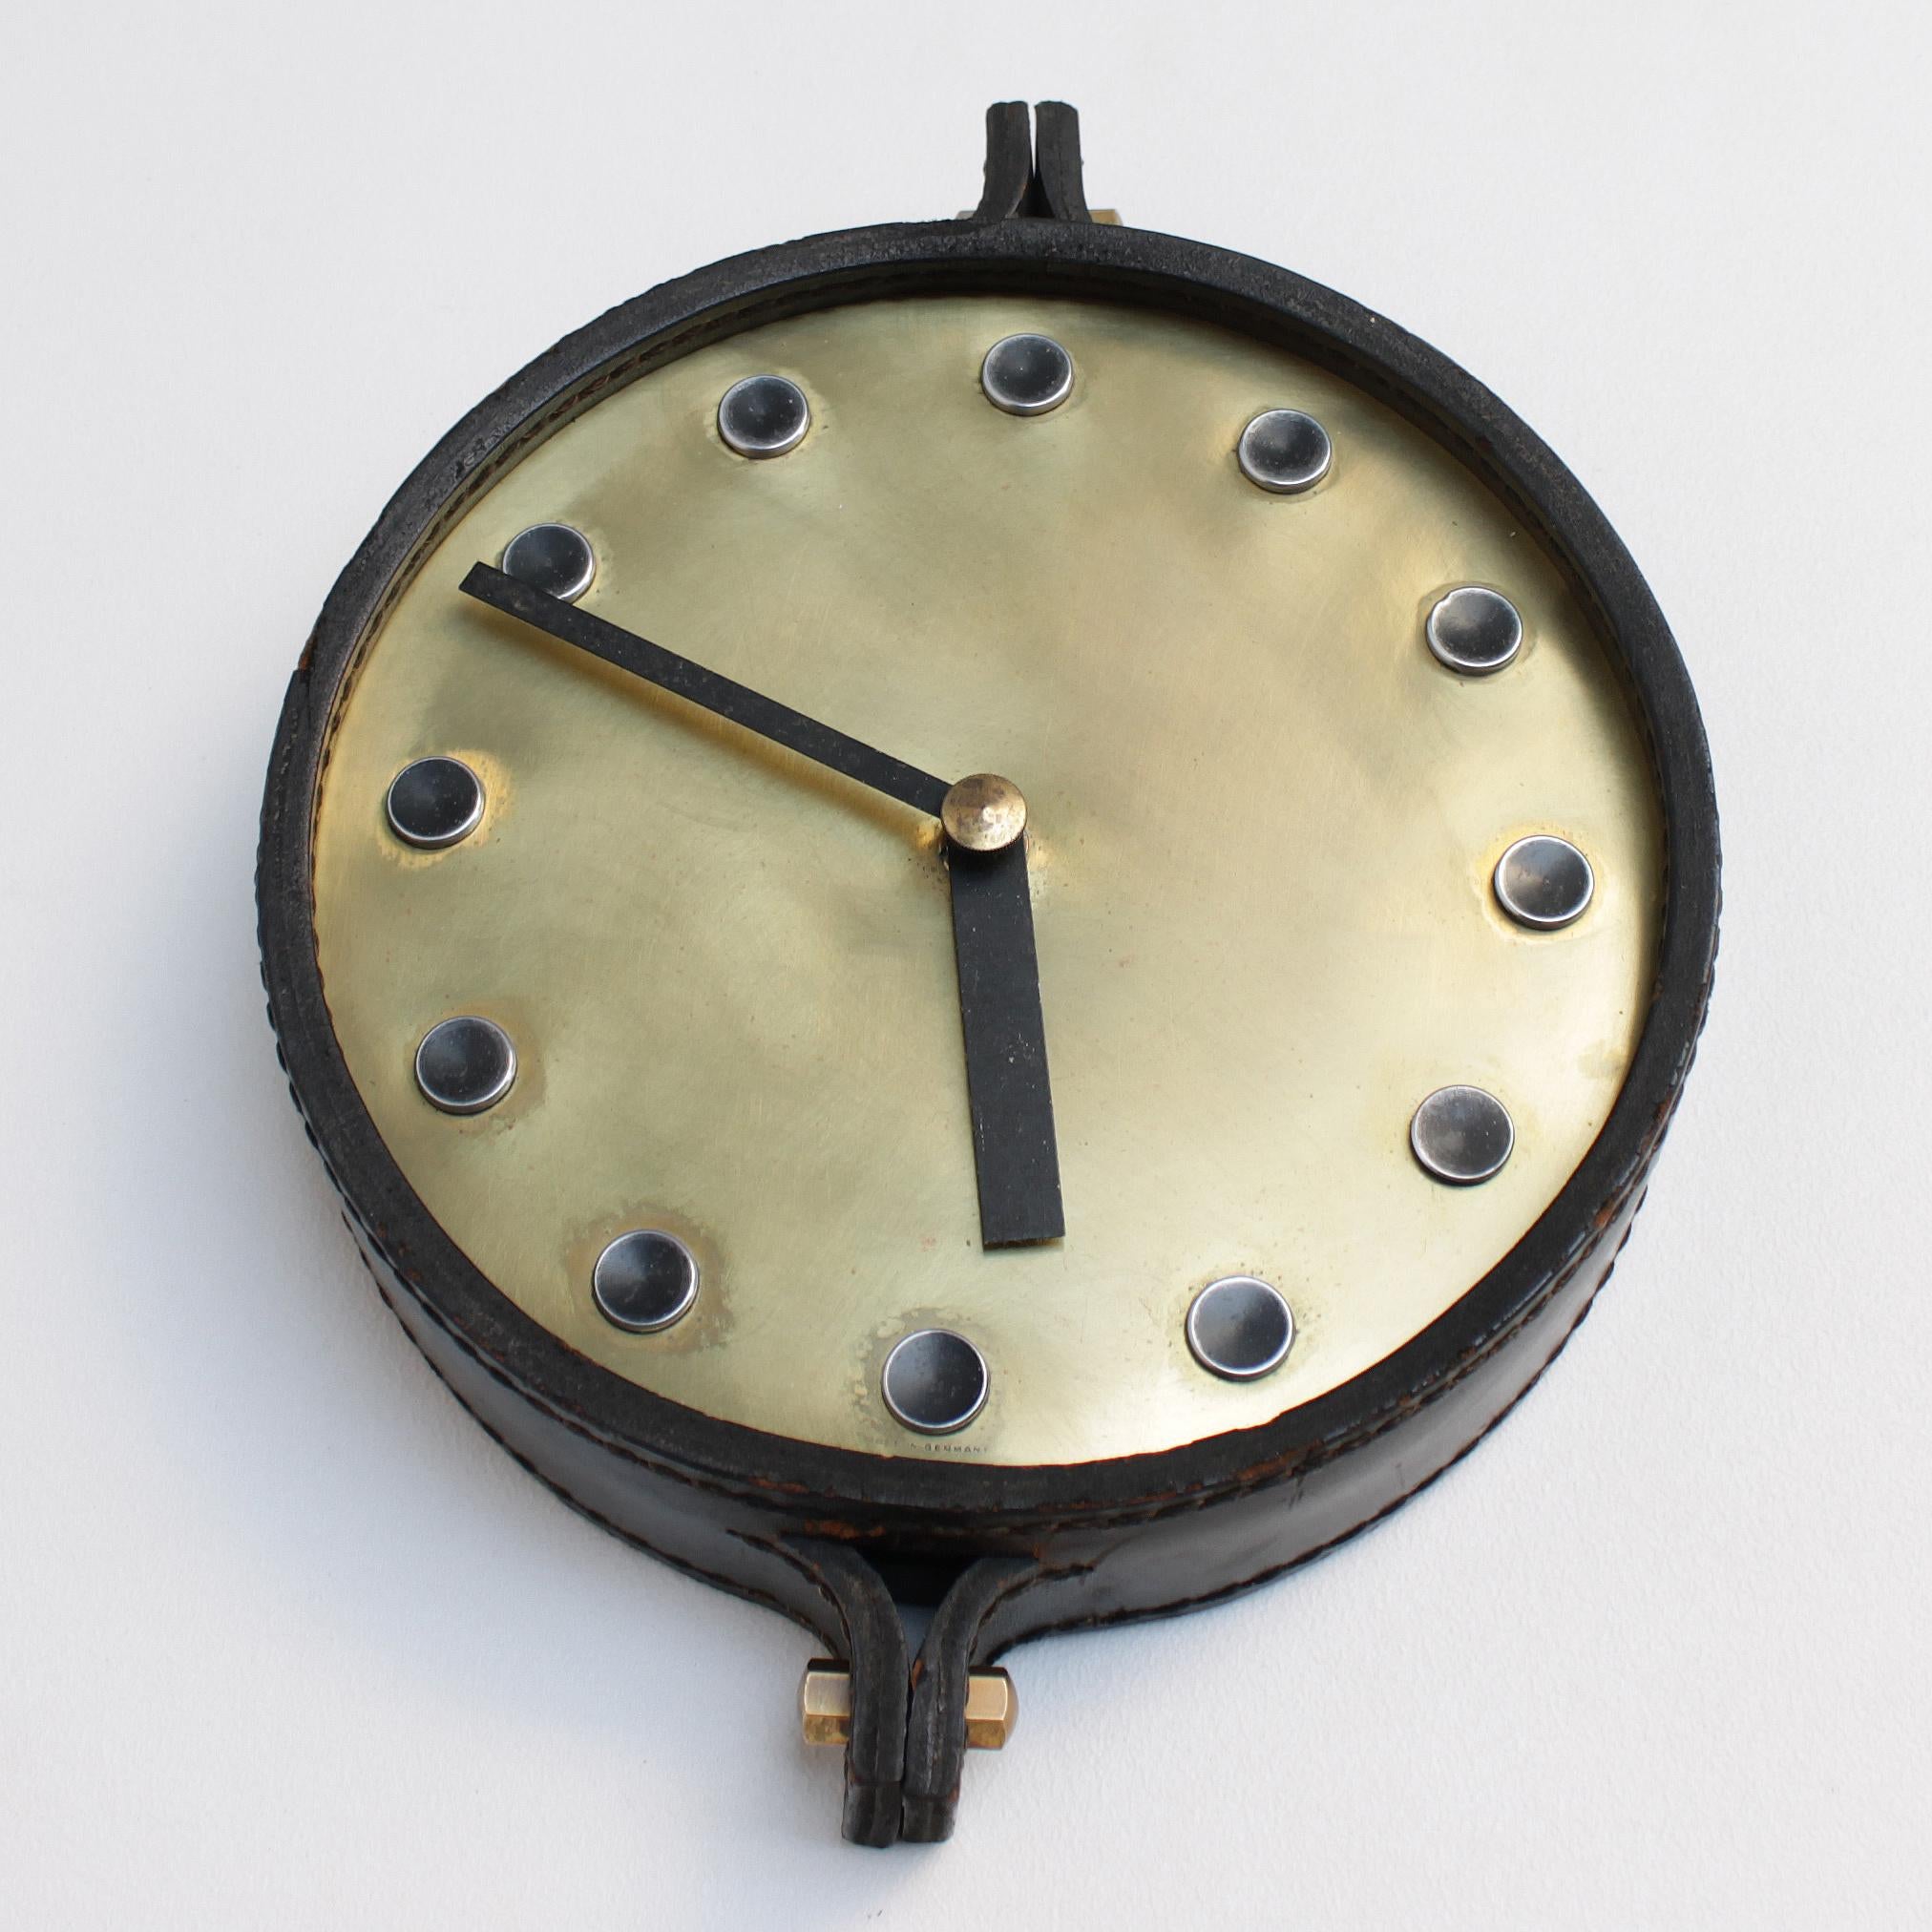 This decorative wall clock resembles a couple of designs by Carl Auböck, but was most likely manufactured by Junghans: the well known German company which also executed the timepieces of Max Bill.
The clock has a steel base and an anodised aluminum